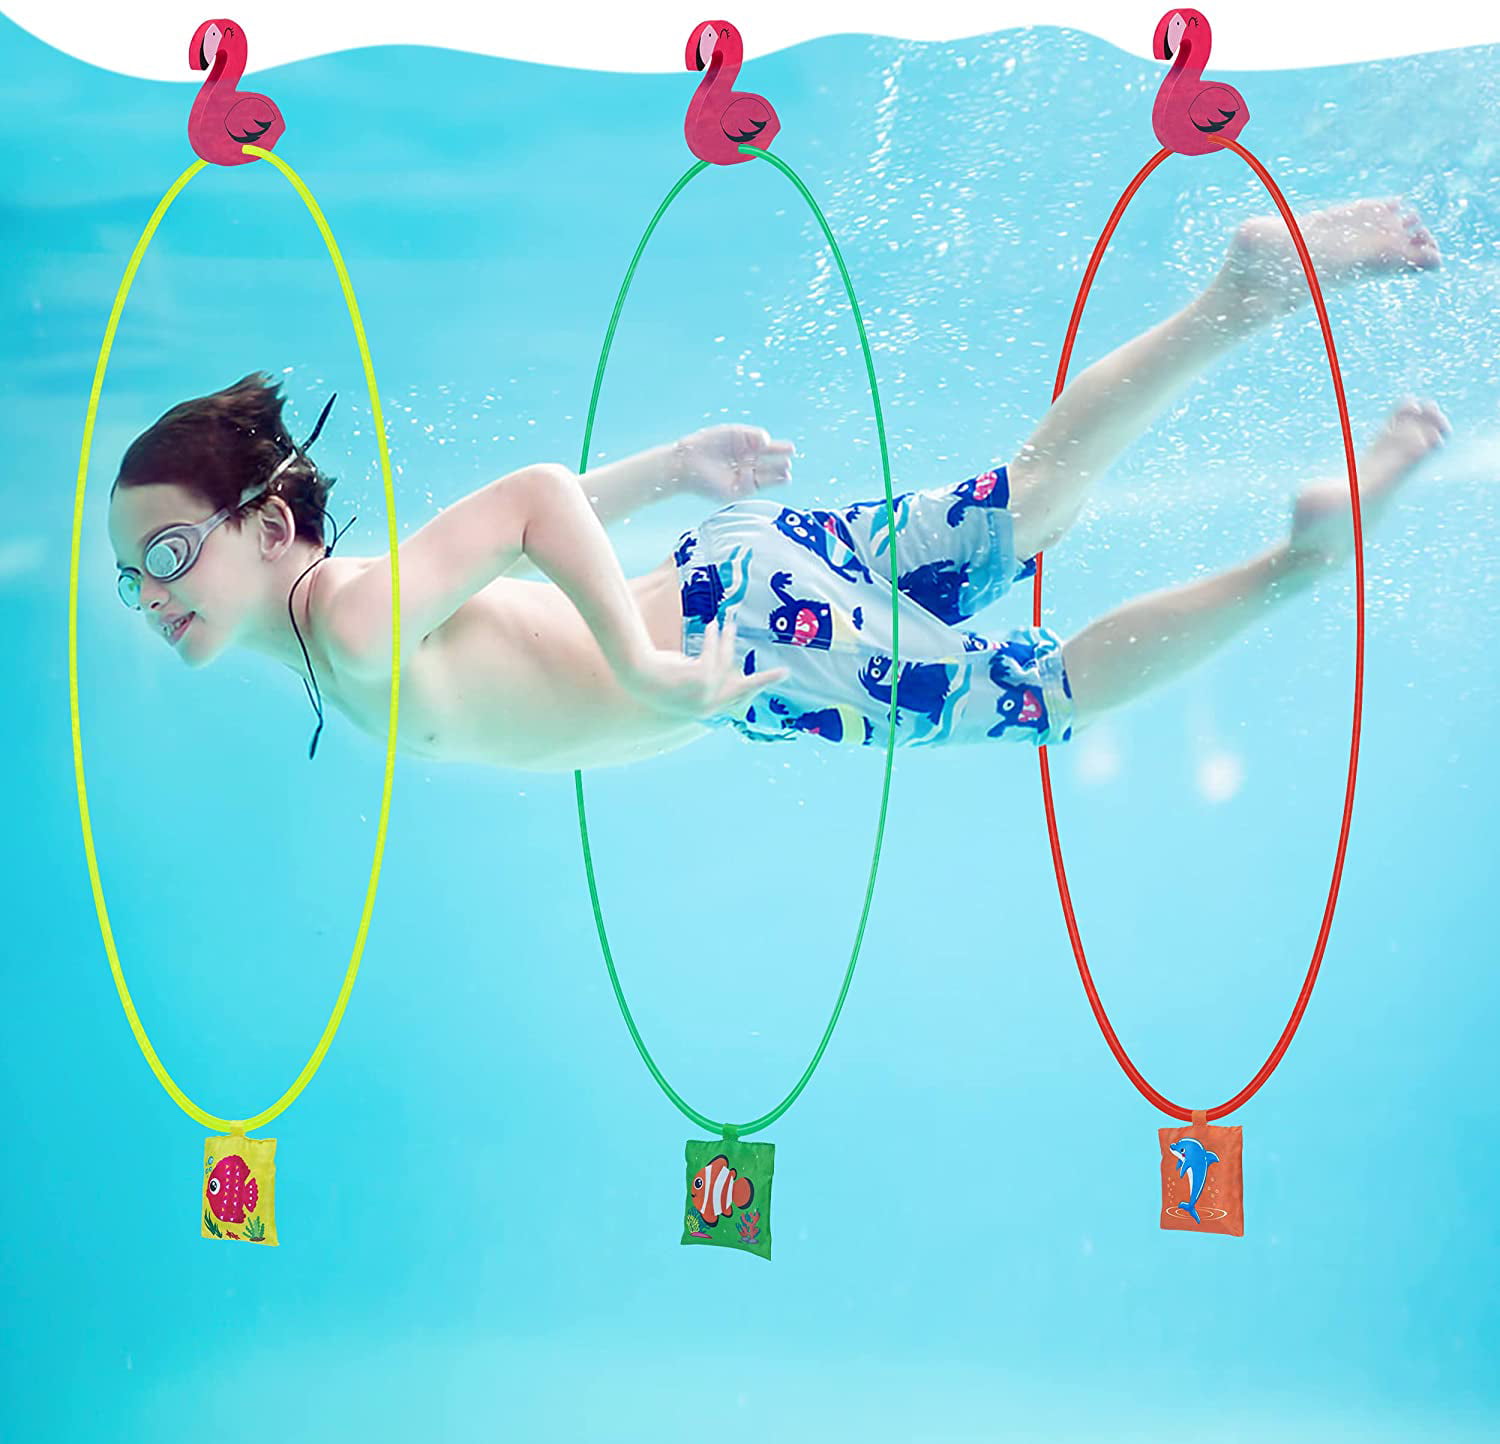 Great accessories for water games set of 4 Swimming Pool Diving Toys Pool supplies for adults and kids Sold by Household Suppliers Training dive toys for learning to swim 